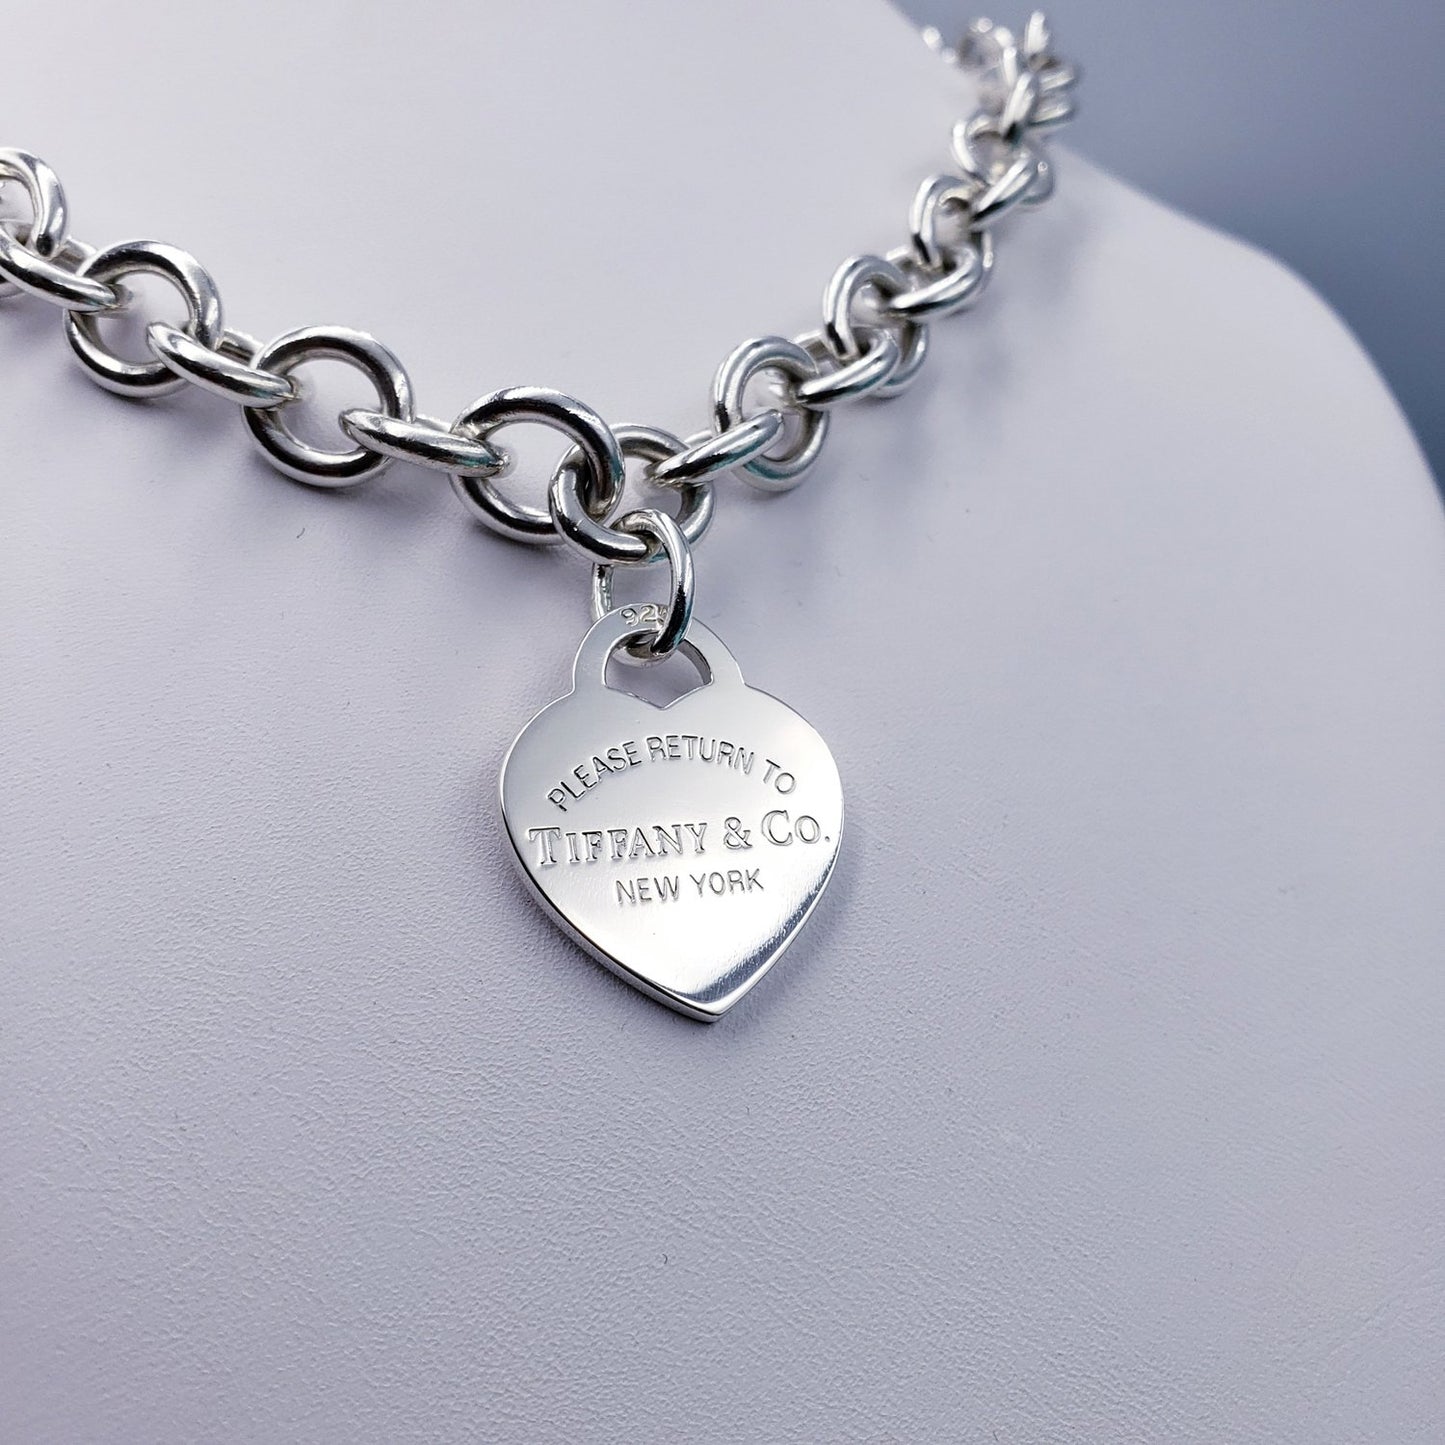 Vintage Tiffany & Co. Heart Charm Necklace